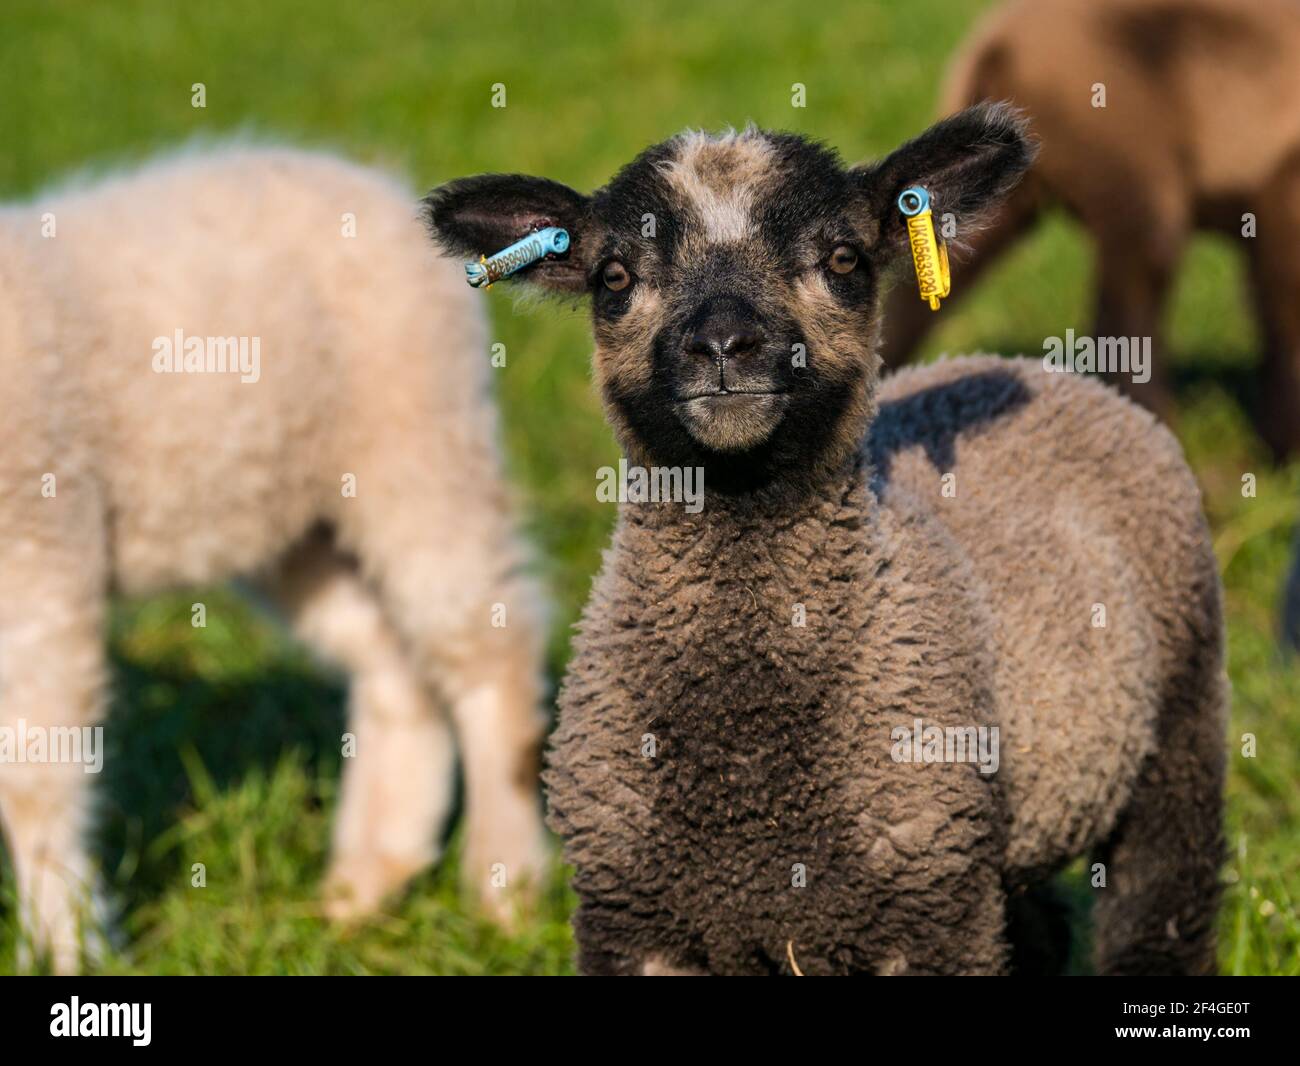 East Lothian, Scotland, United Kingdom, 21st March 2021., UK Weather: Spring lambs in sunshine. Shetland sheep lambs enjoy the Spring sunshine in a grassy green field and their curiosity allows some close ups. A curious female Katmoget coloured cute Spring lamb Stock Photo